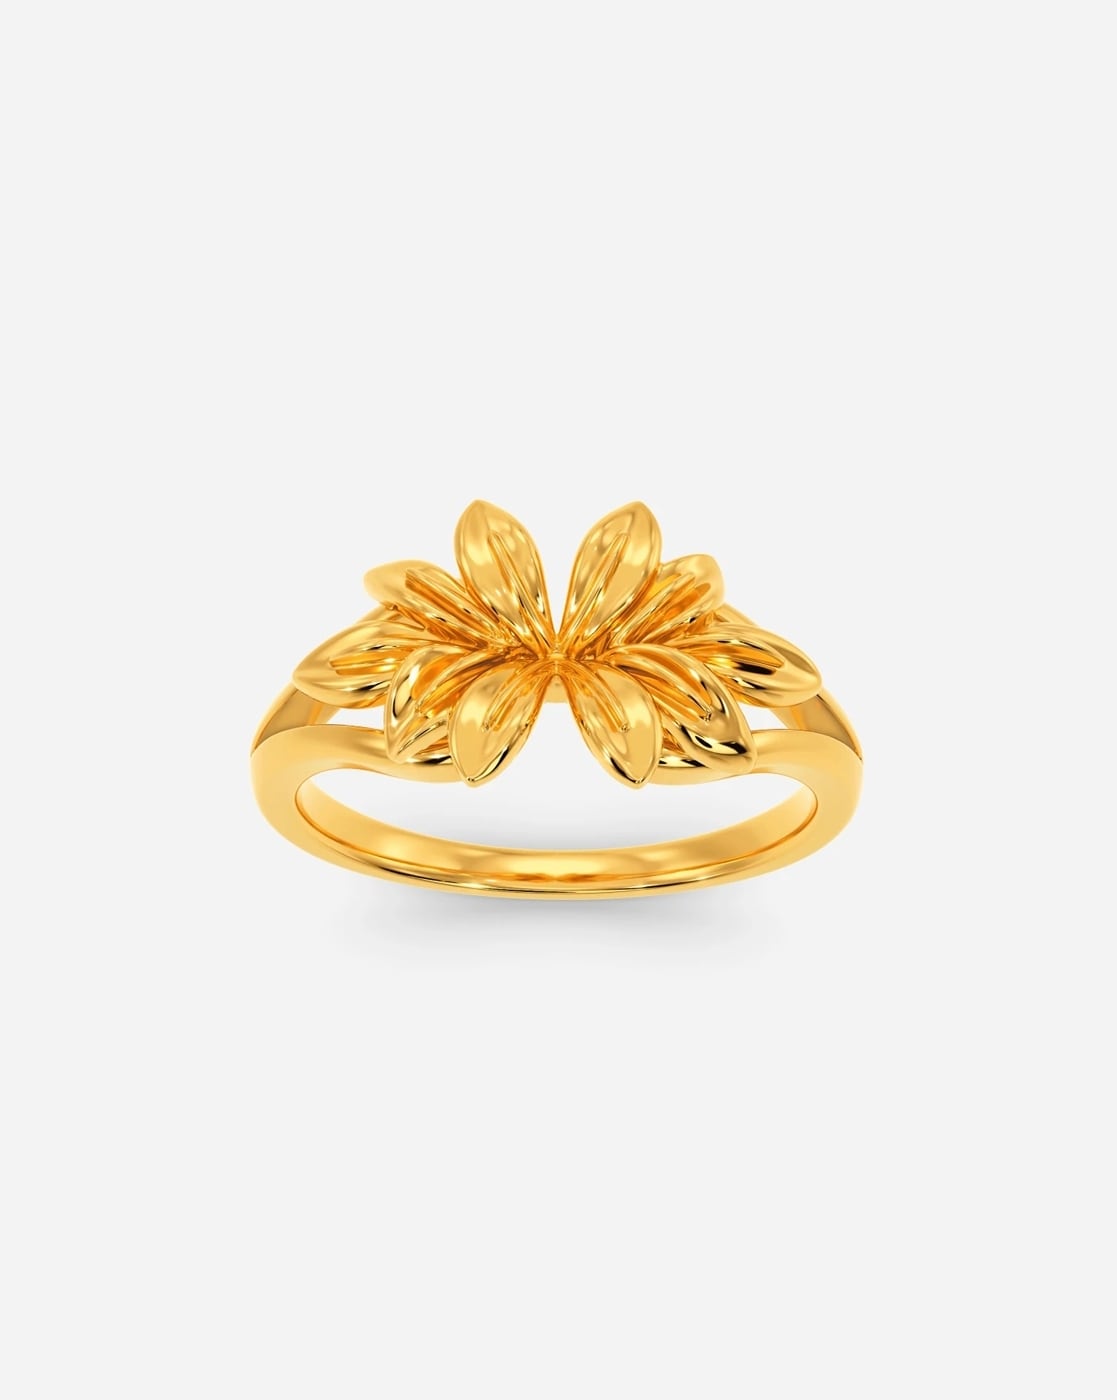 check out for latest and tradition fancy gold rings at voguecrafts | Gold  rings fashion, Gold ring designs, Gents gold ring